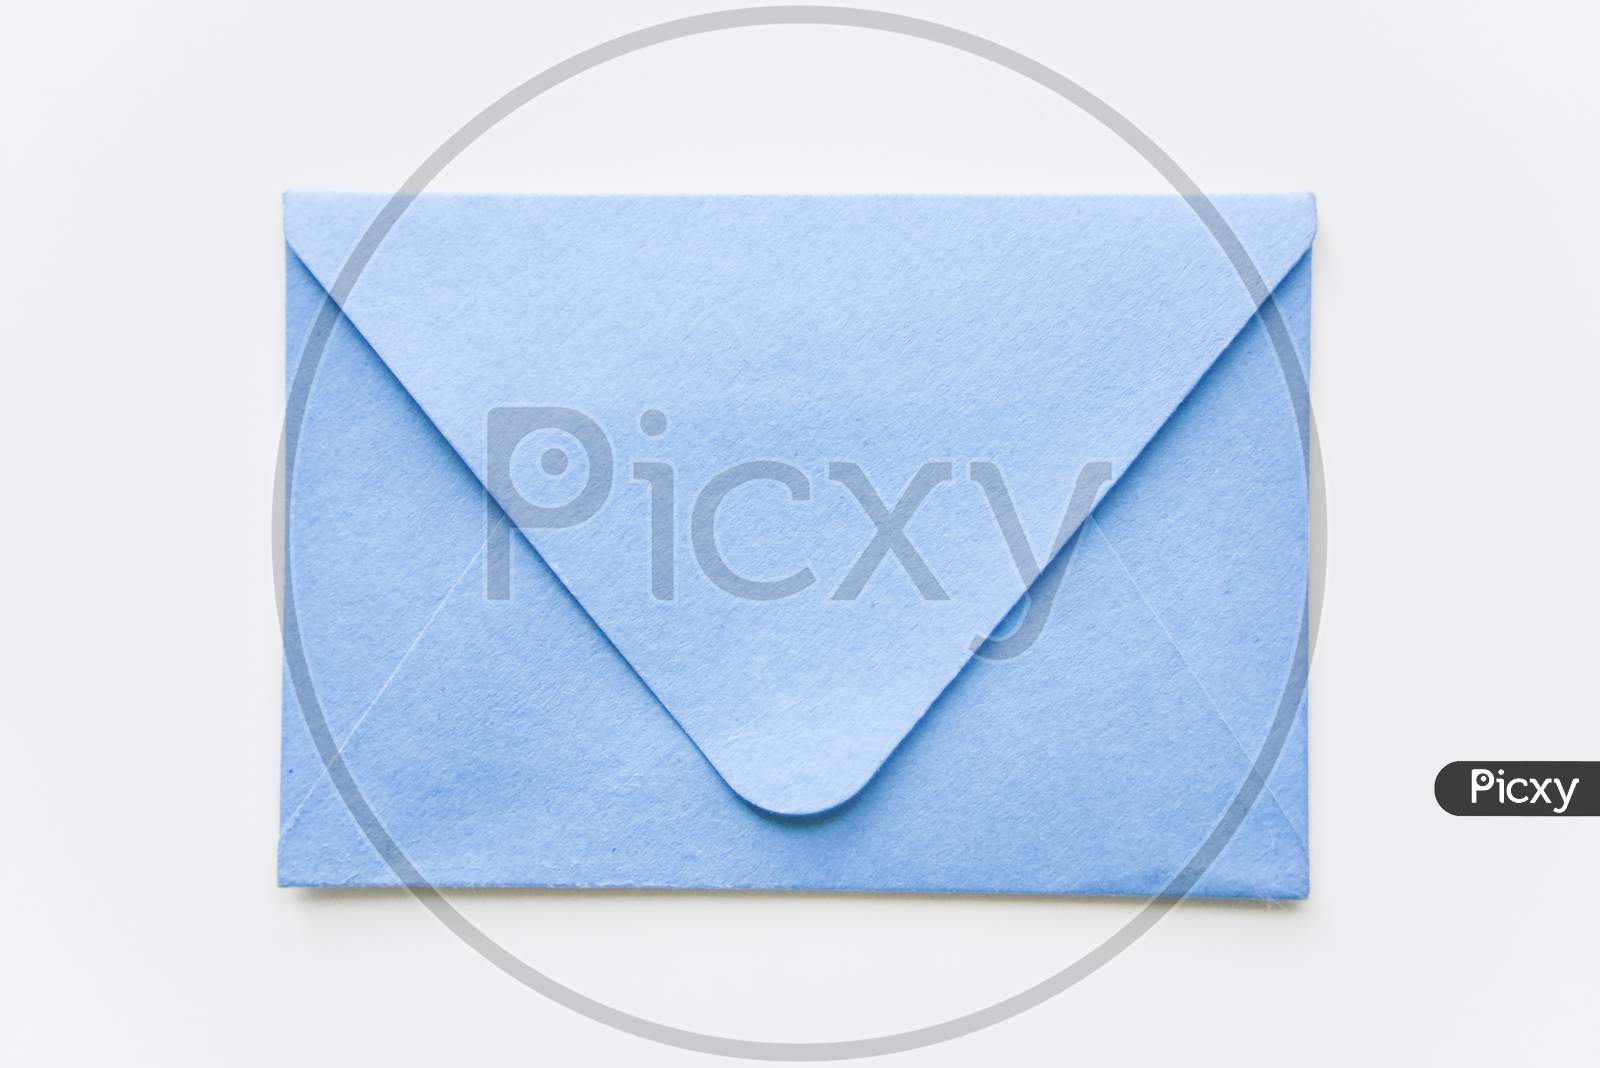 Classic Blue Envelope With Round Corners On The White Background